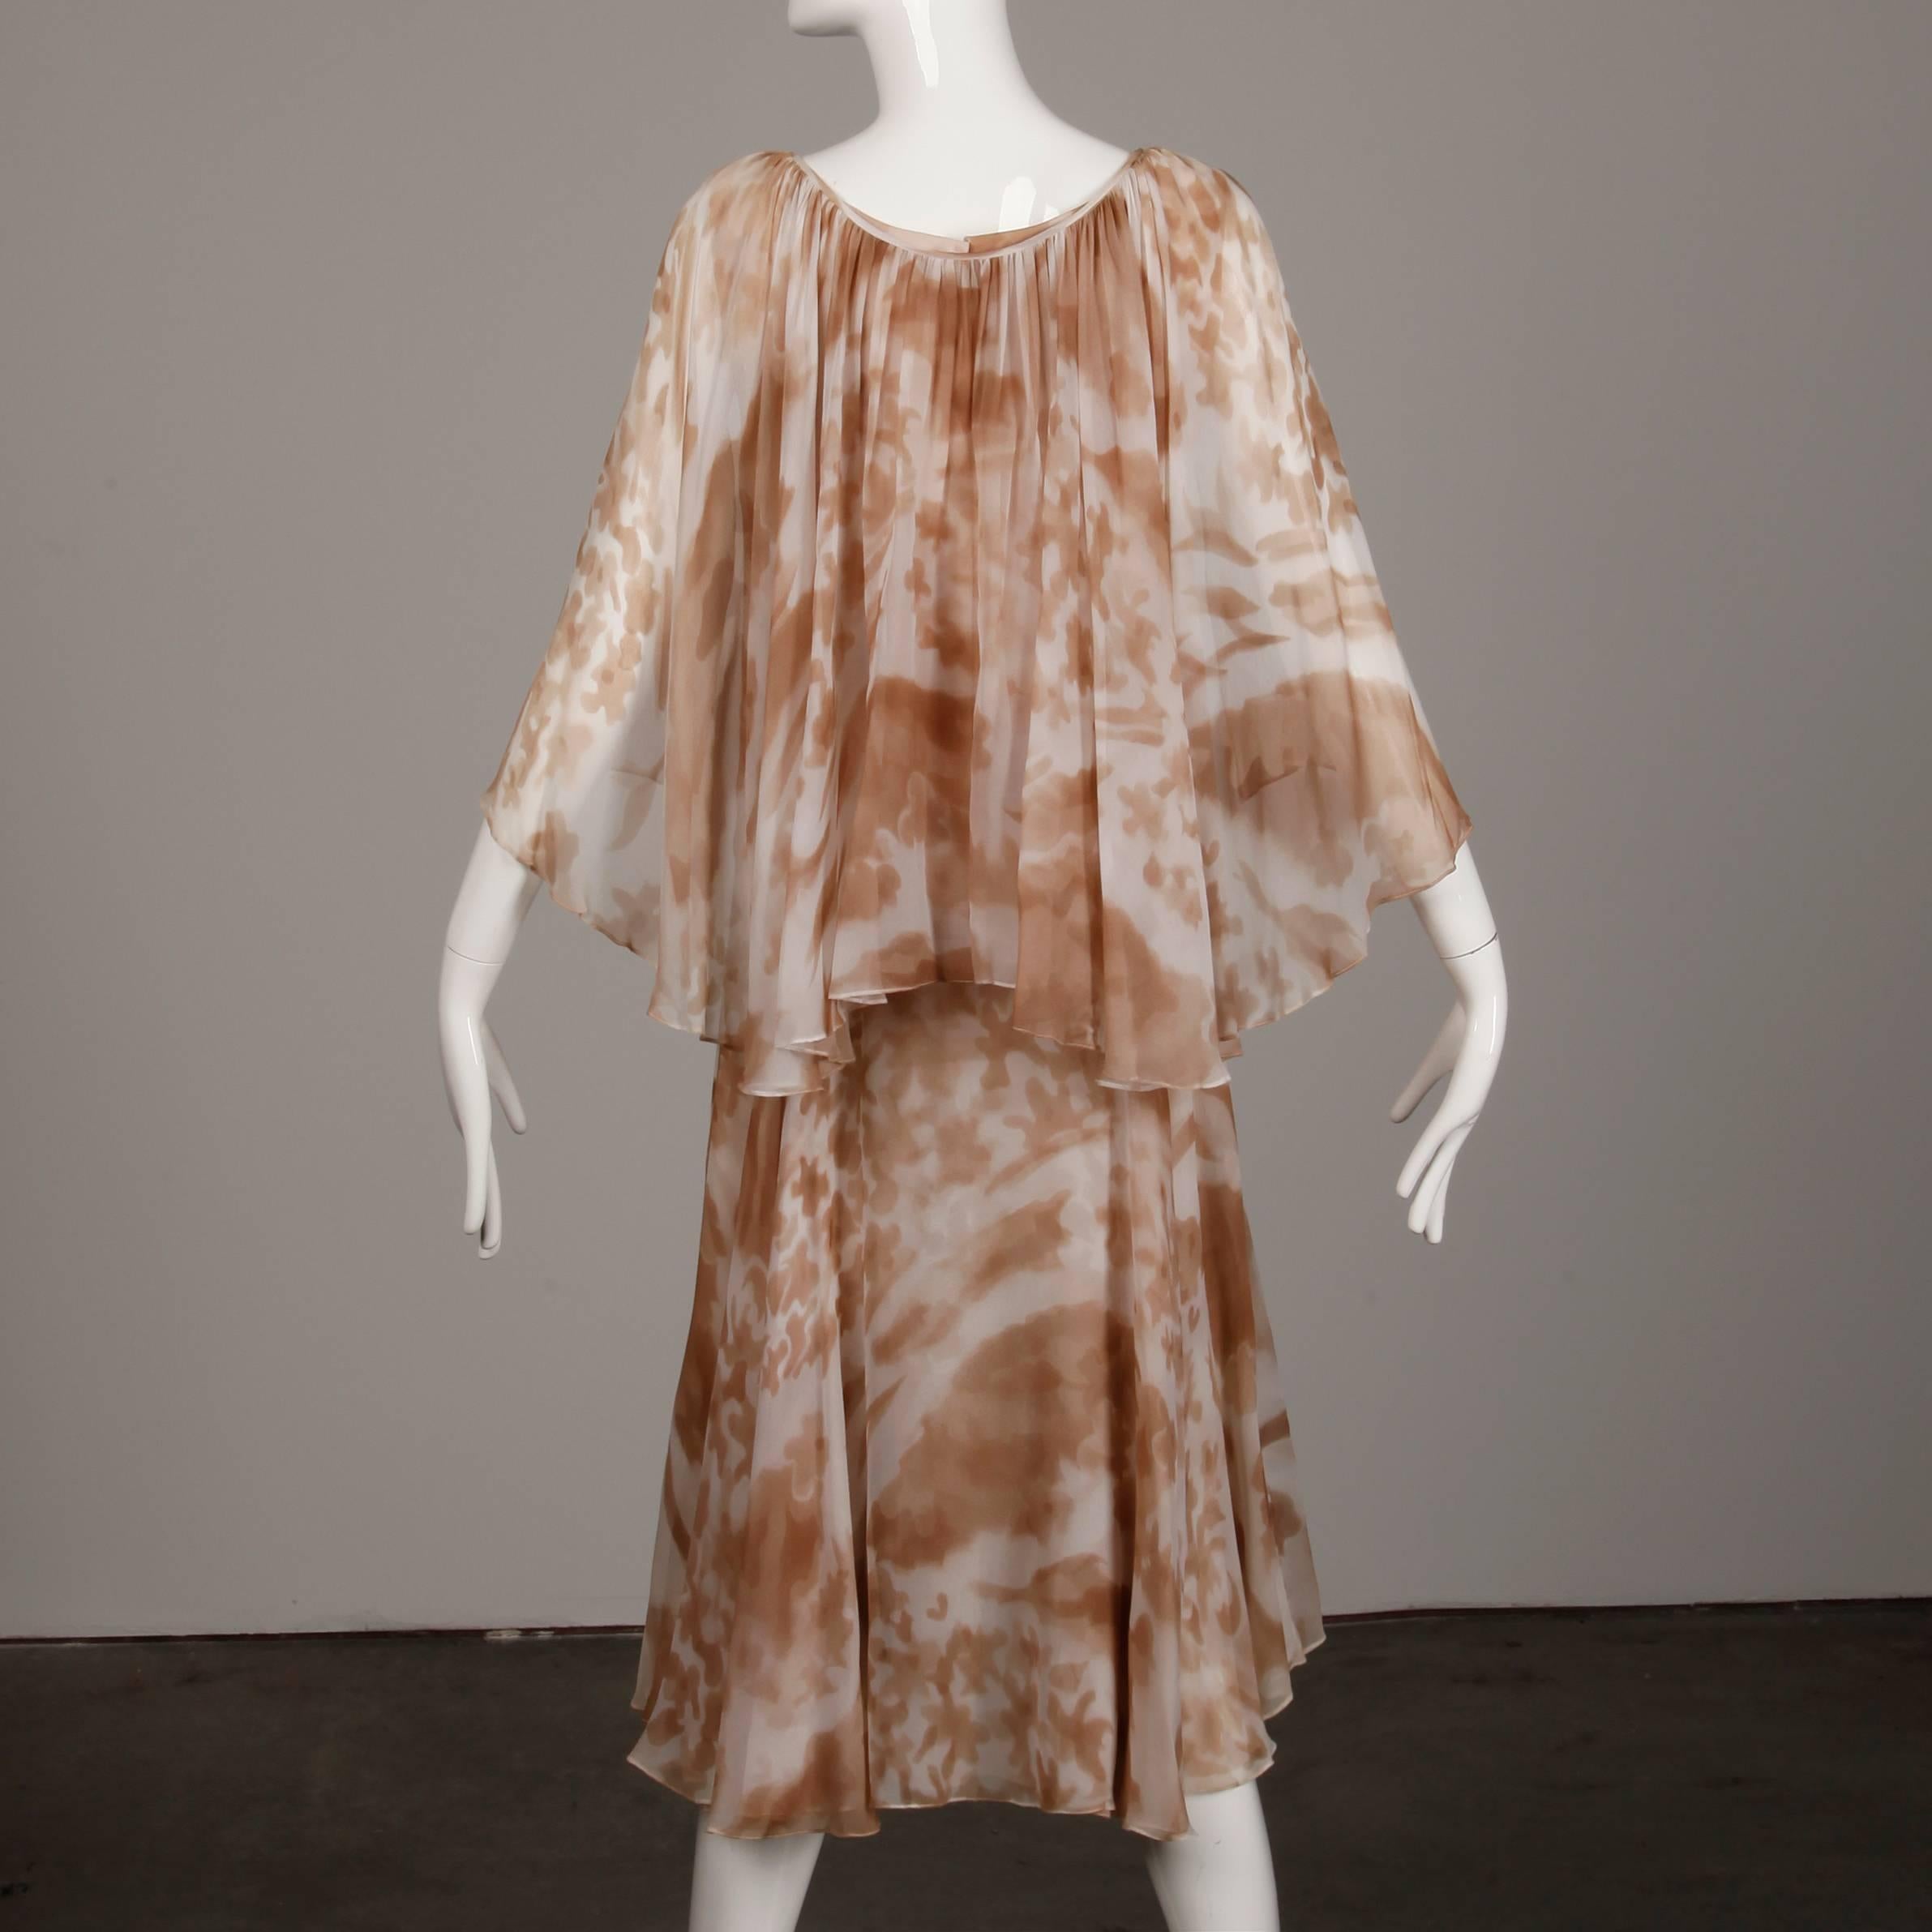 1970s Mr. Blackwell Vintage Sheer Silk Chiffon Print Dress with Detachable Cape For Sale 3